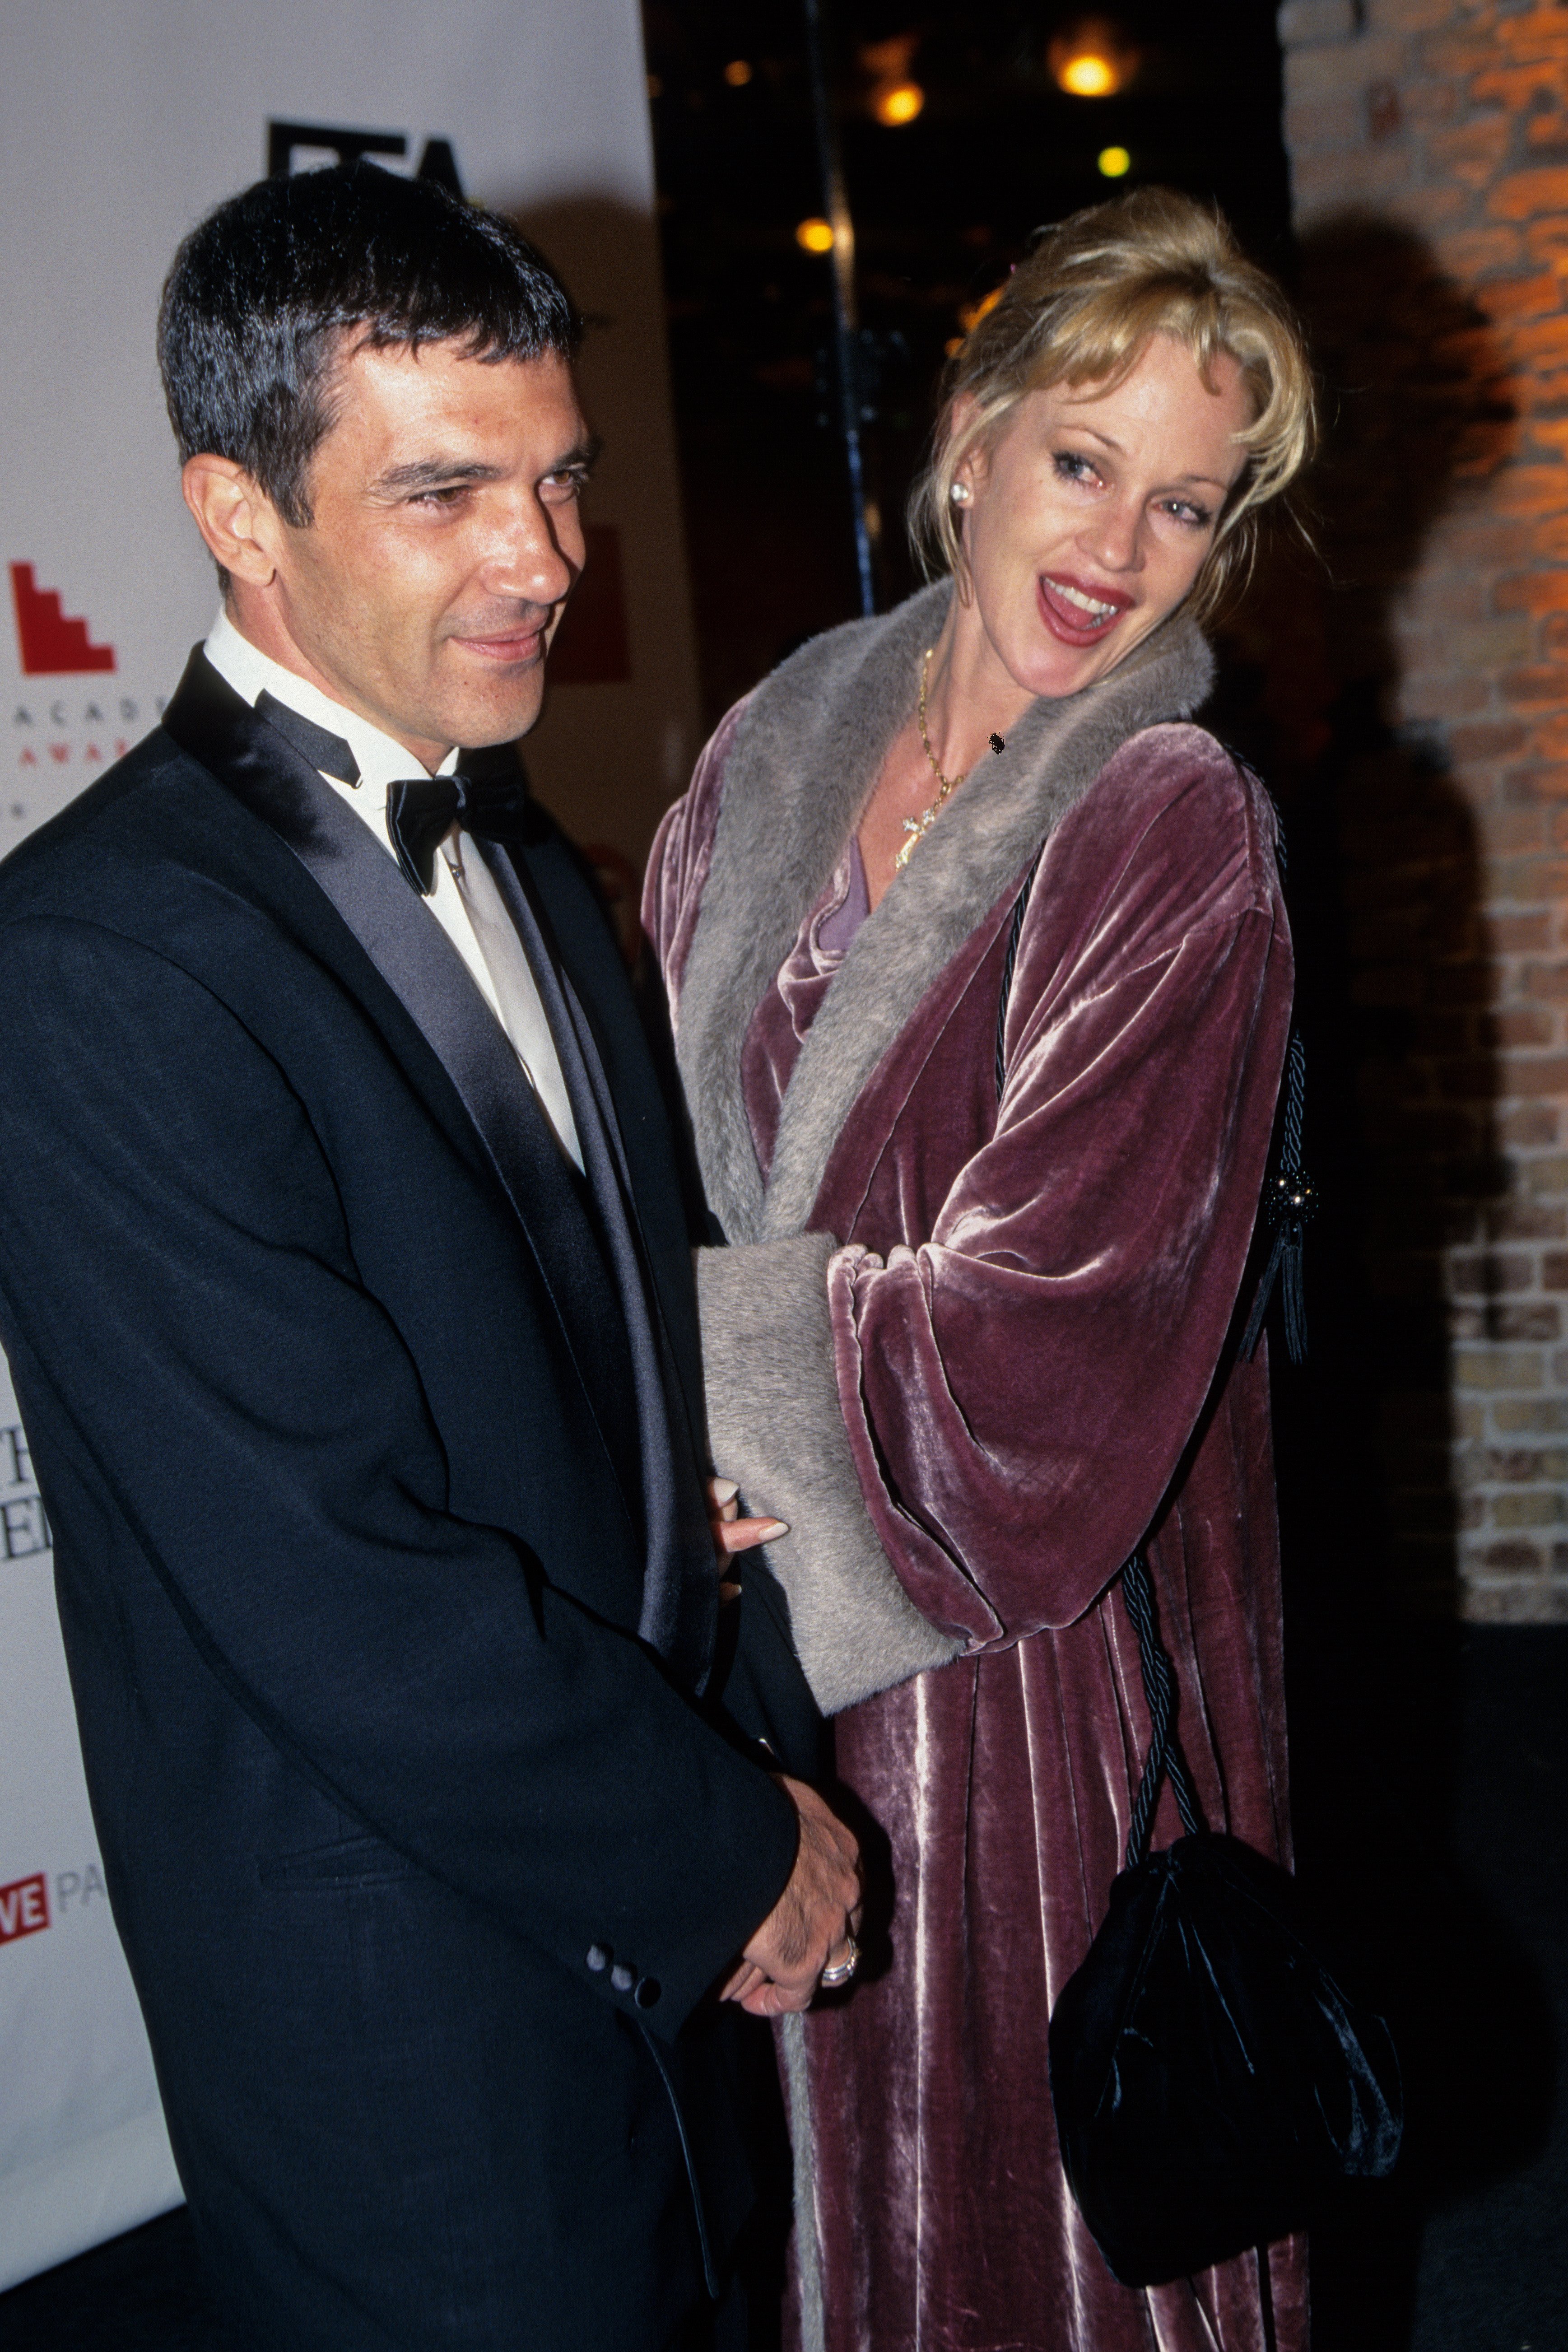 Antonio Banderas and Melanie Griffith are photographed the European Film Award in December 1999 in Berlin, Germany | Source: Getty Images